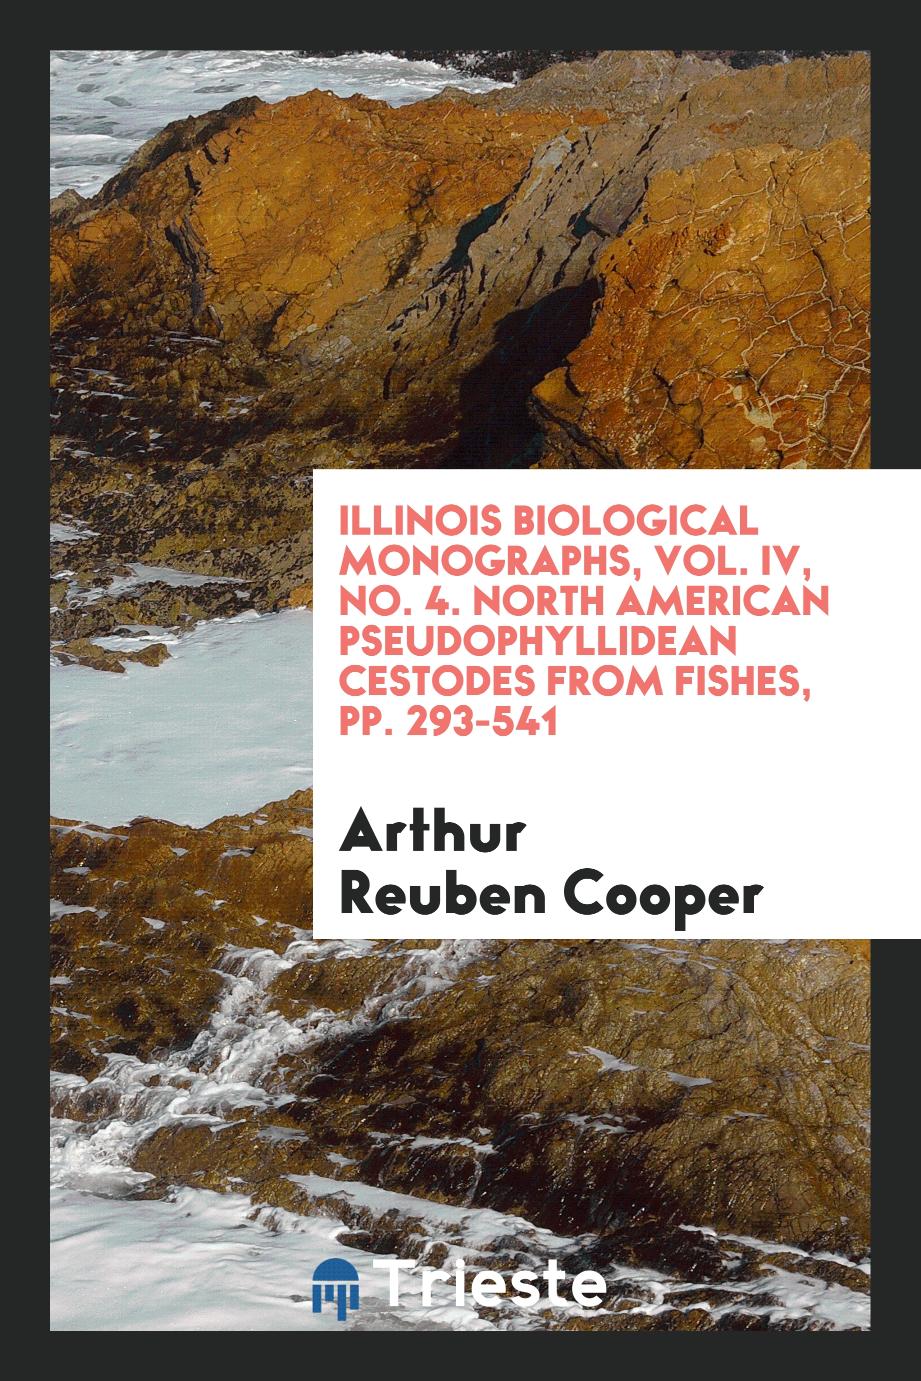 Illinois Biological Monographs, Vol. IV, No. 4. North American pseudophyllidean cestodes from fishes, pp. 293-541